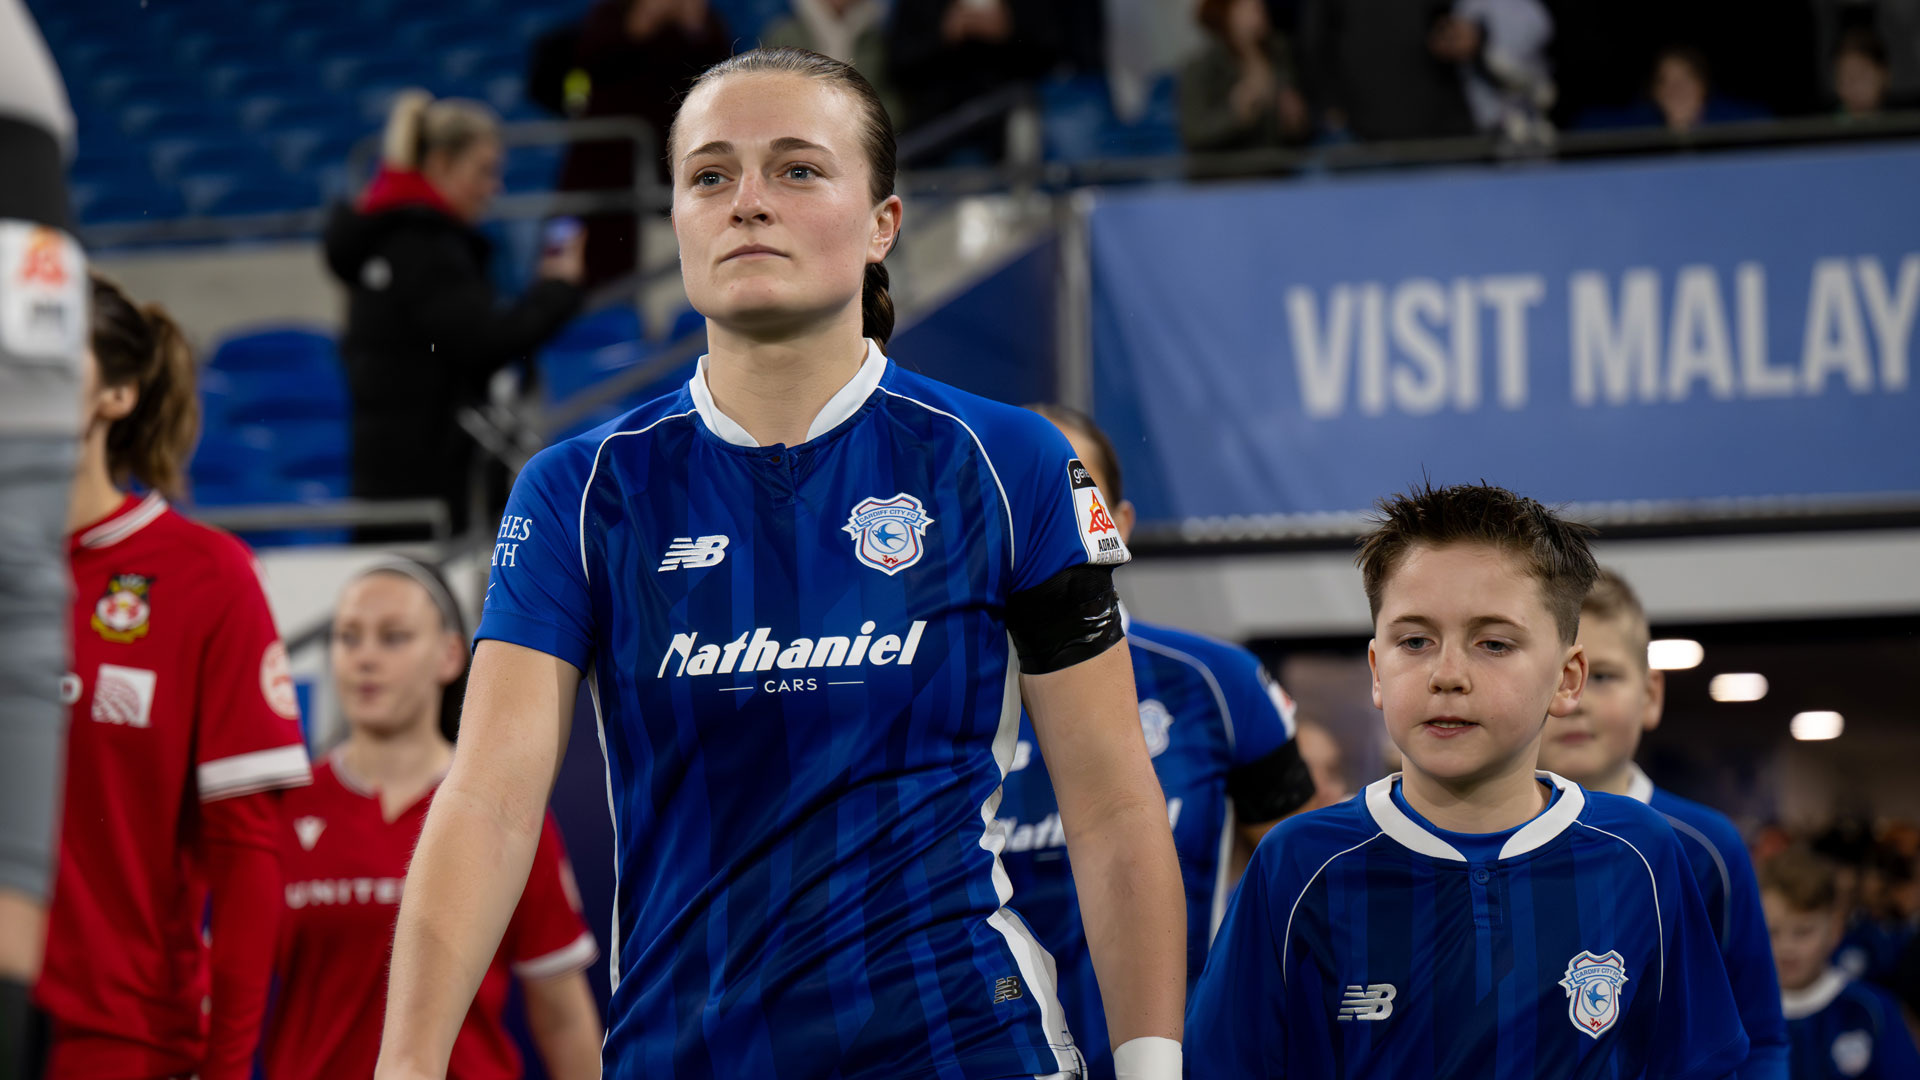 Ffion Price in action for Cardiff City Women